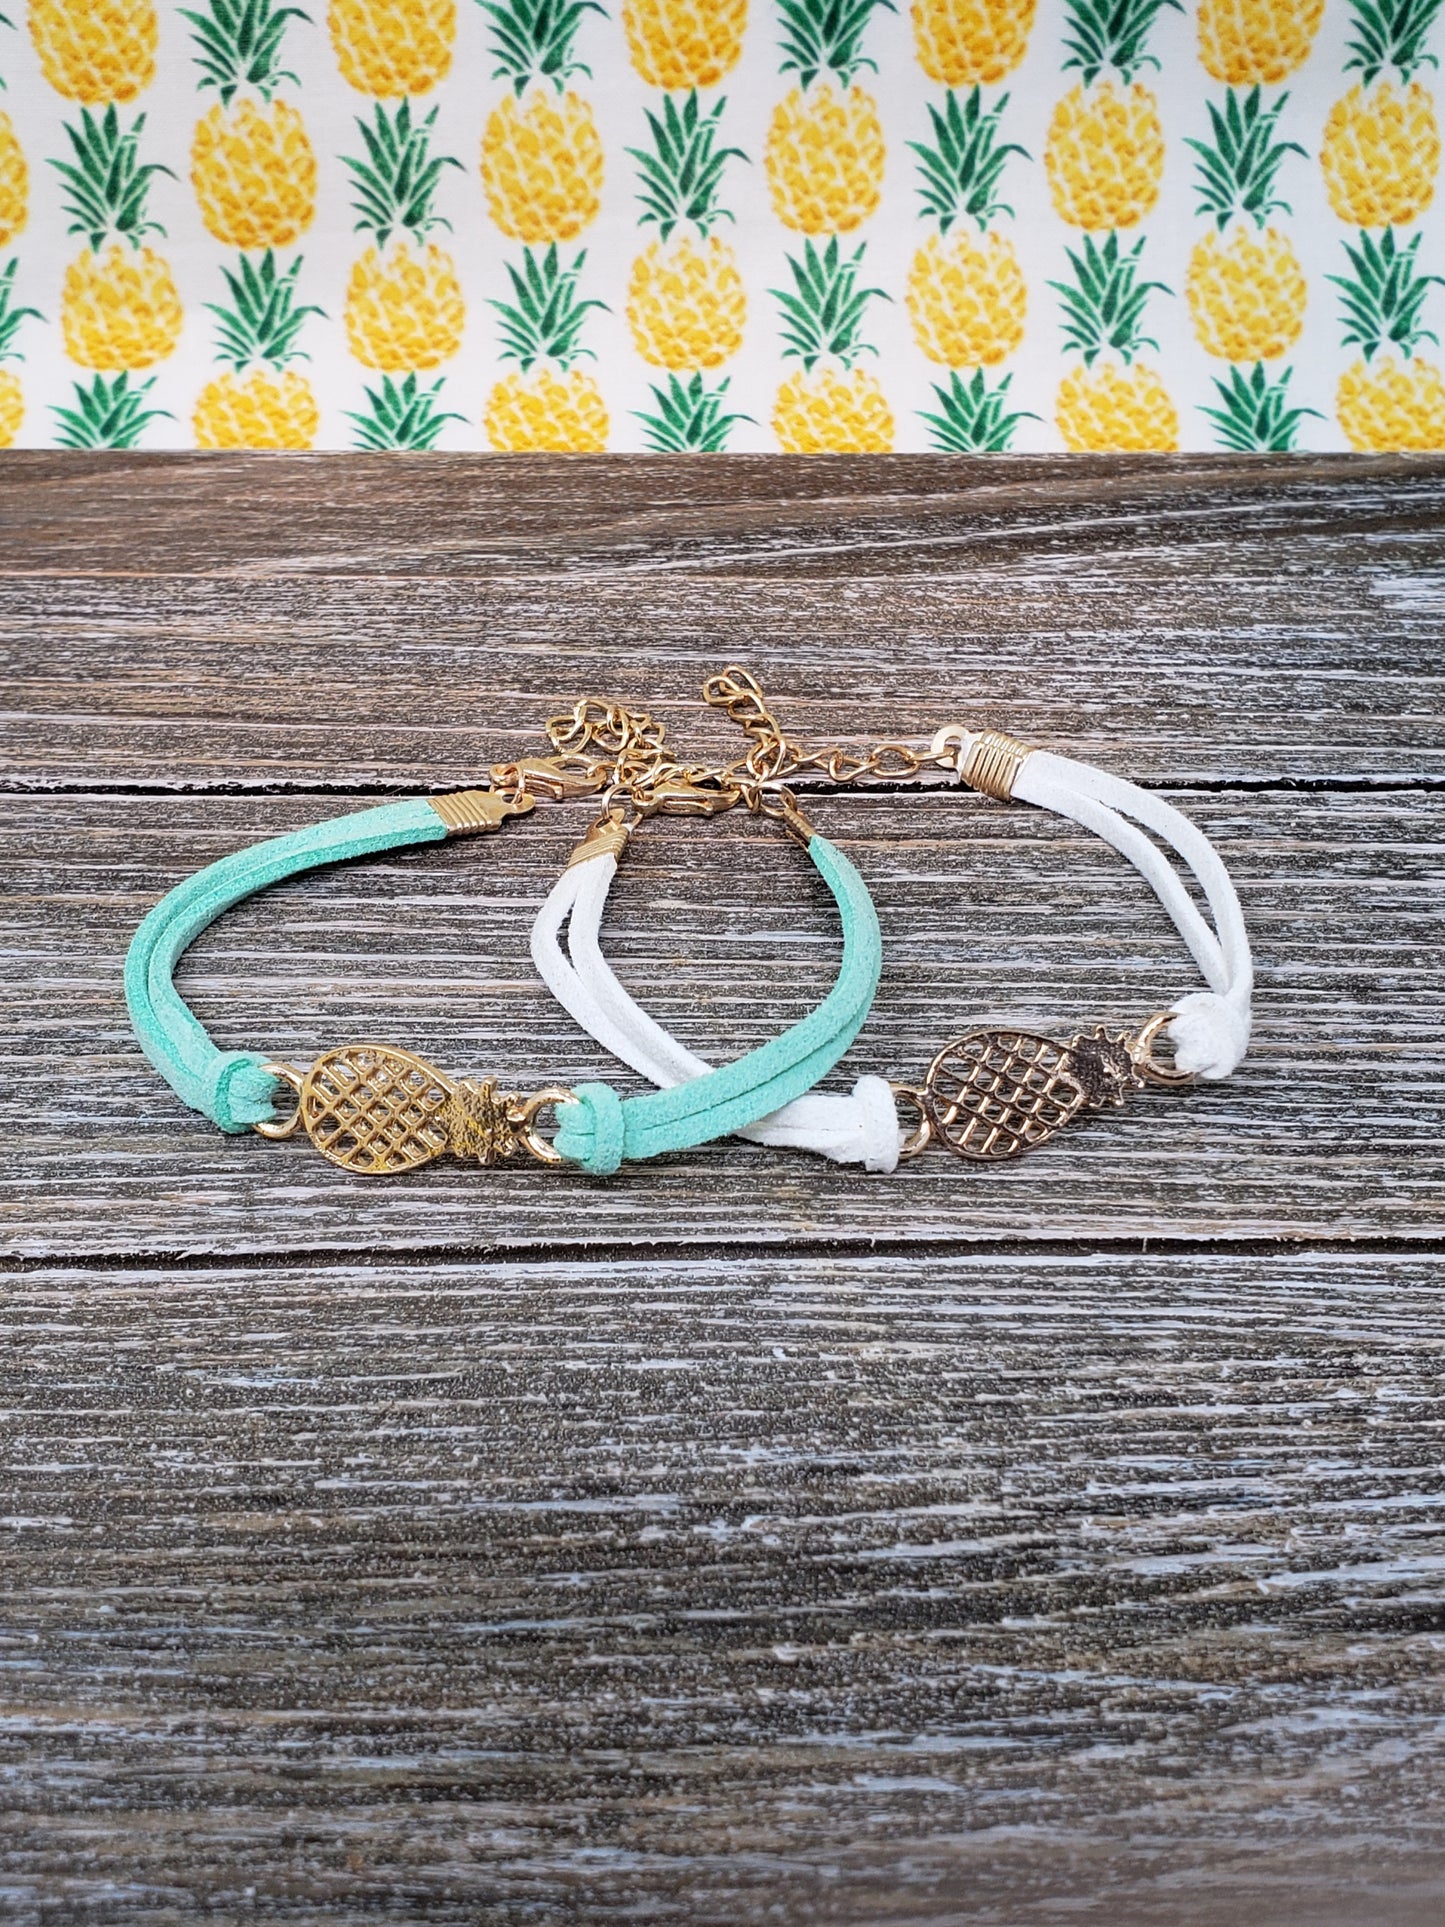 Pineapple Bracelet with Adjustable Chord Fertility Gift - Green and White